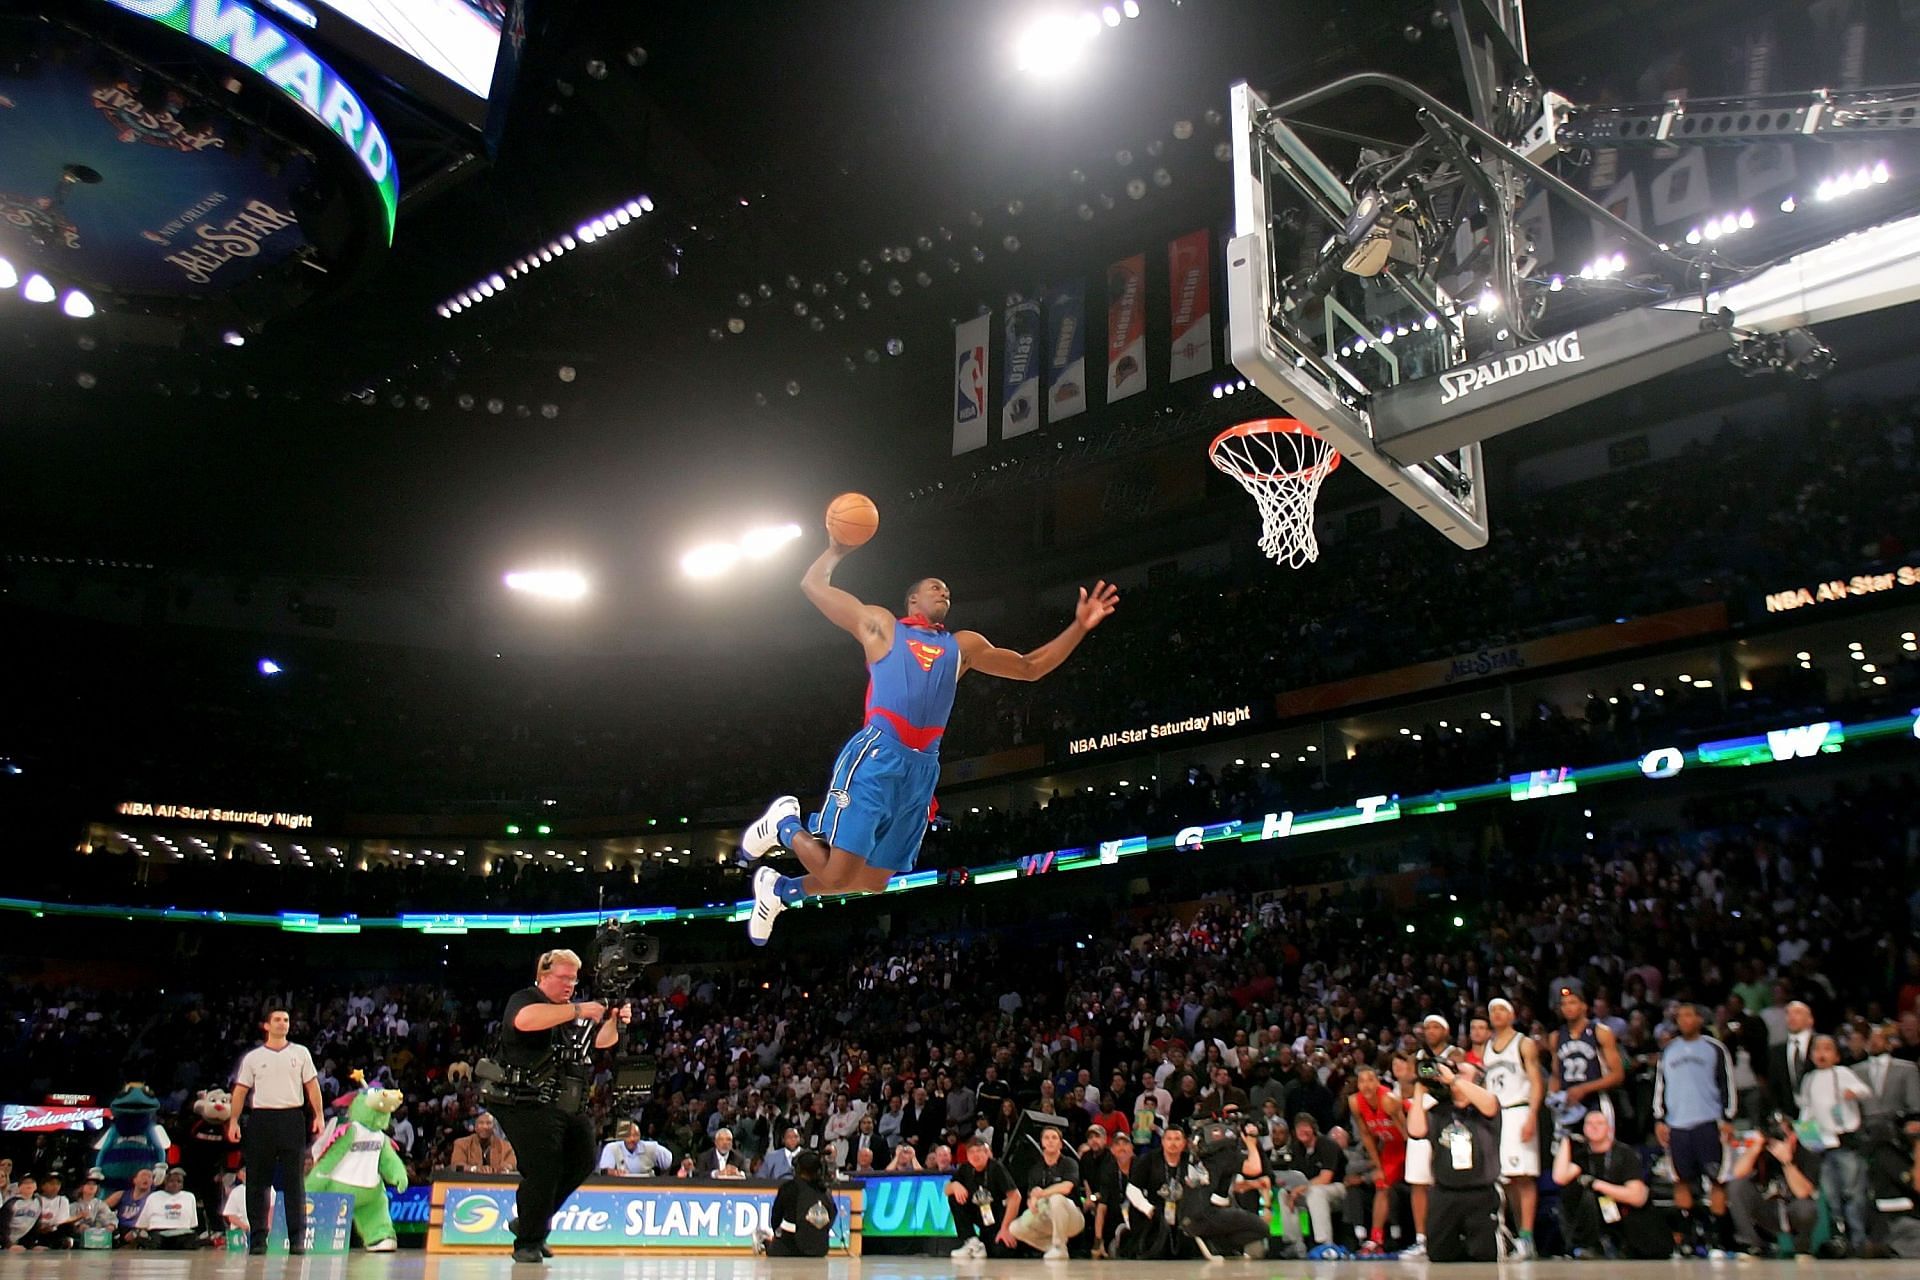 Dwight Howard won the Sprite Slam Dunk Contest in 2008.